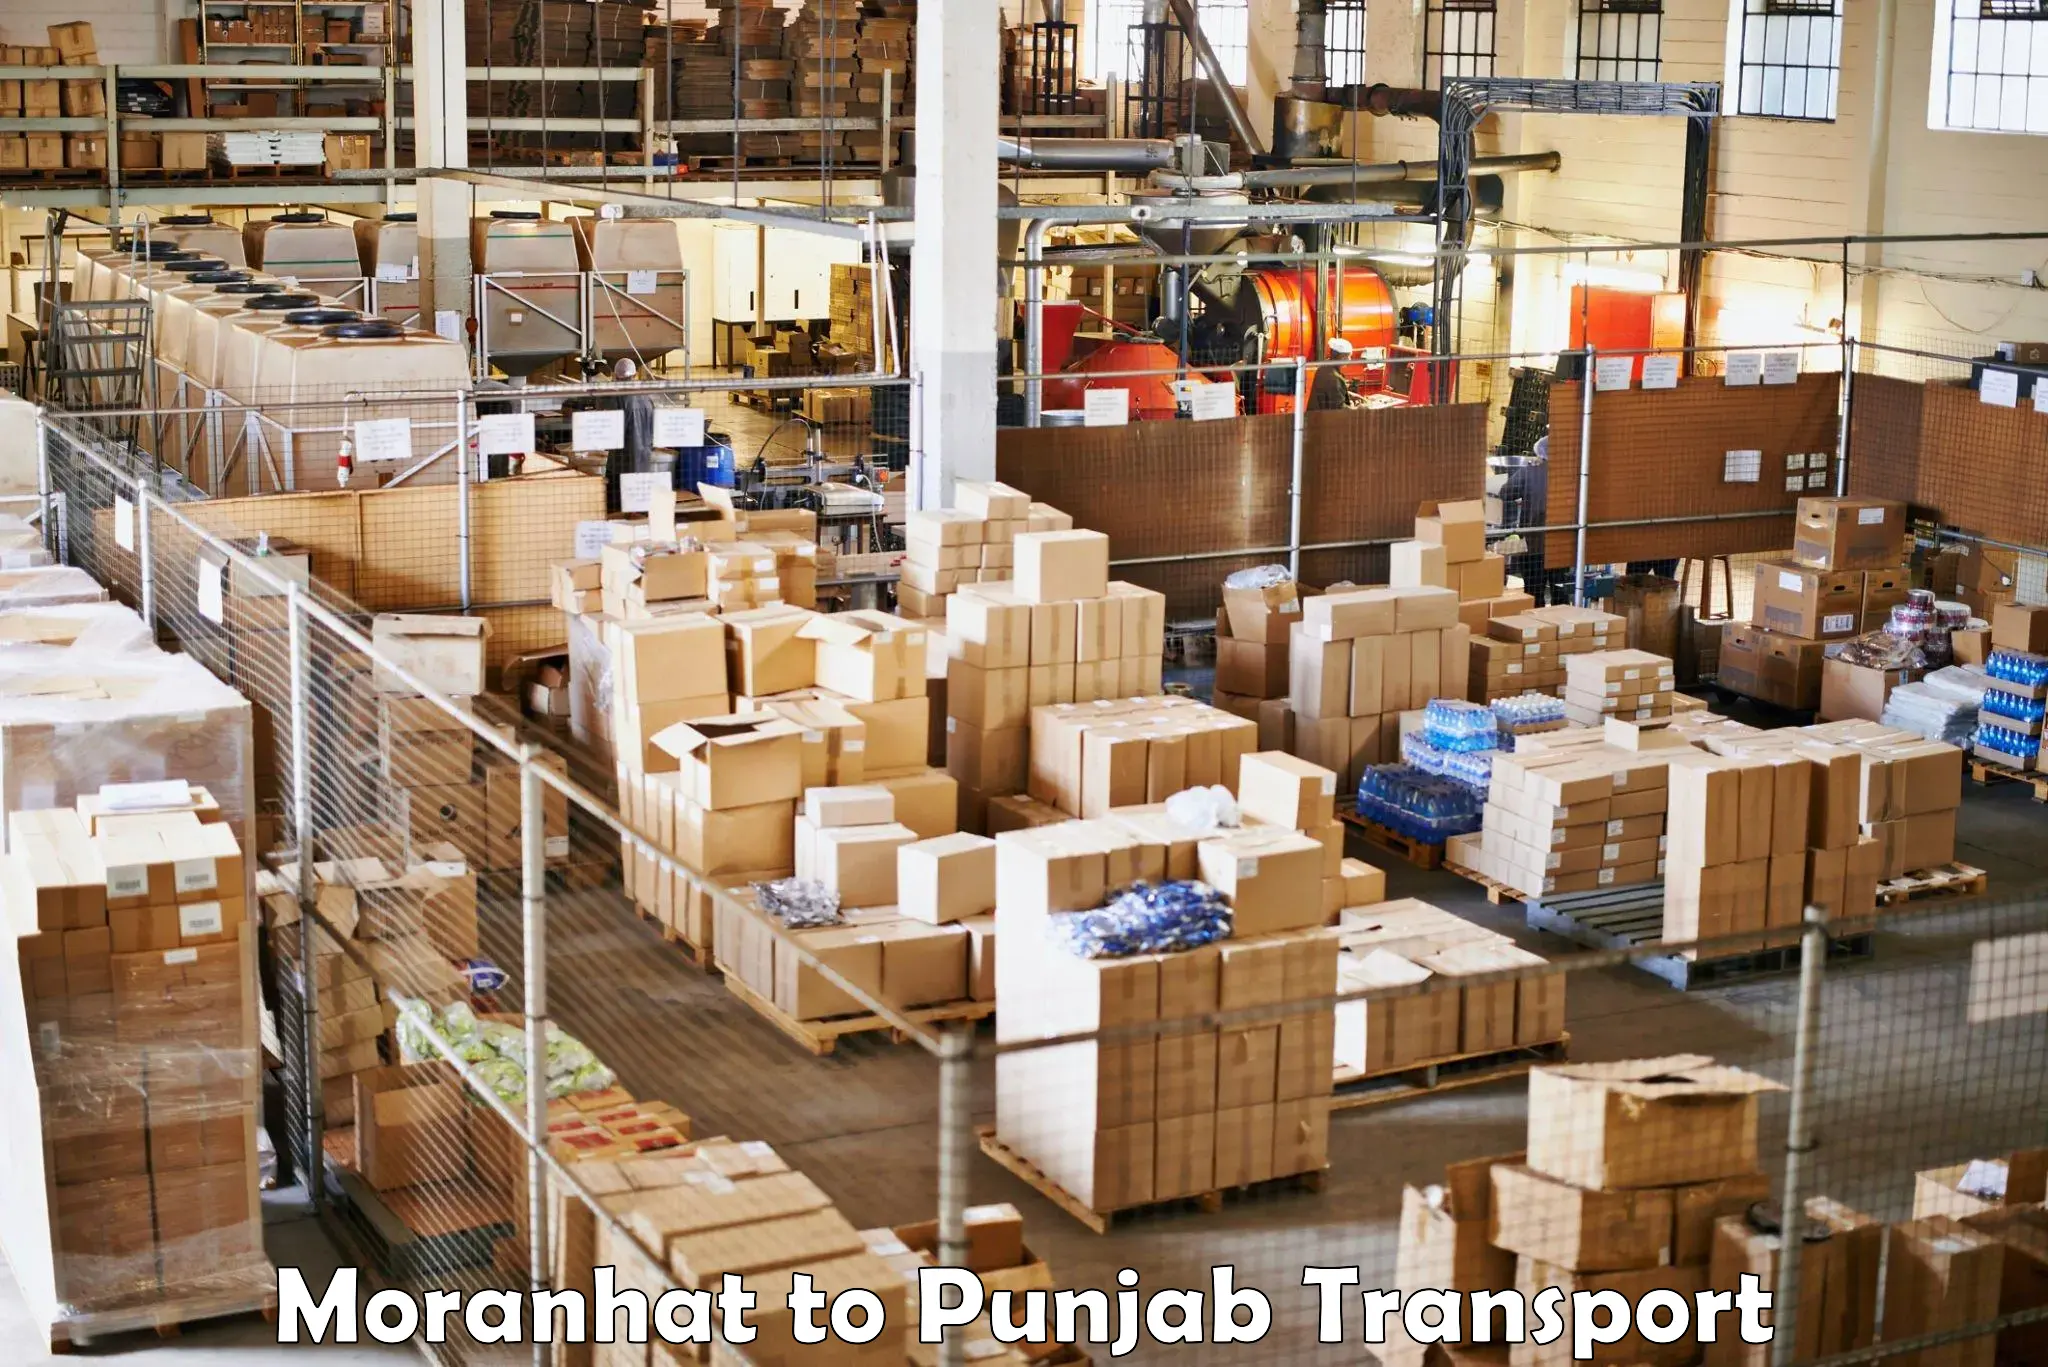 Container transport service Moranhat to Mohali